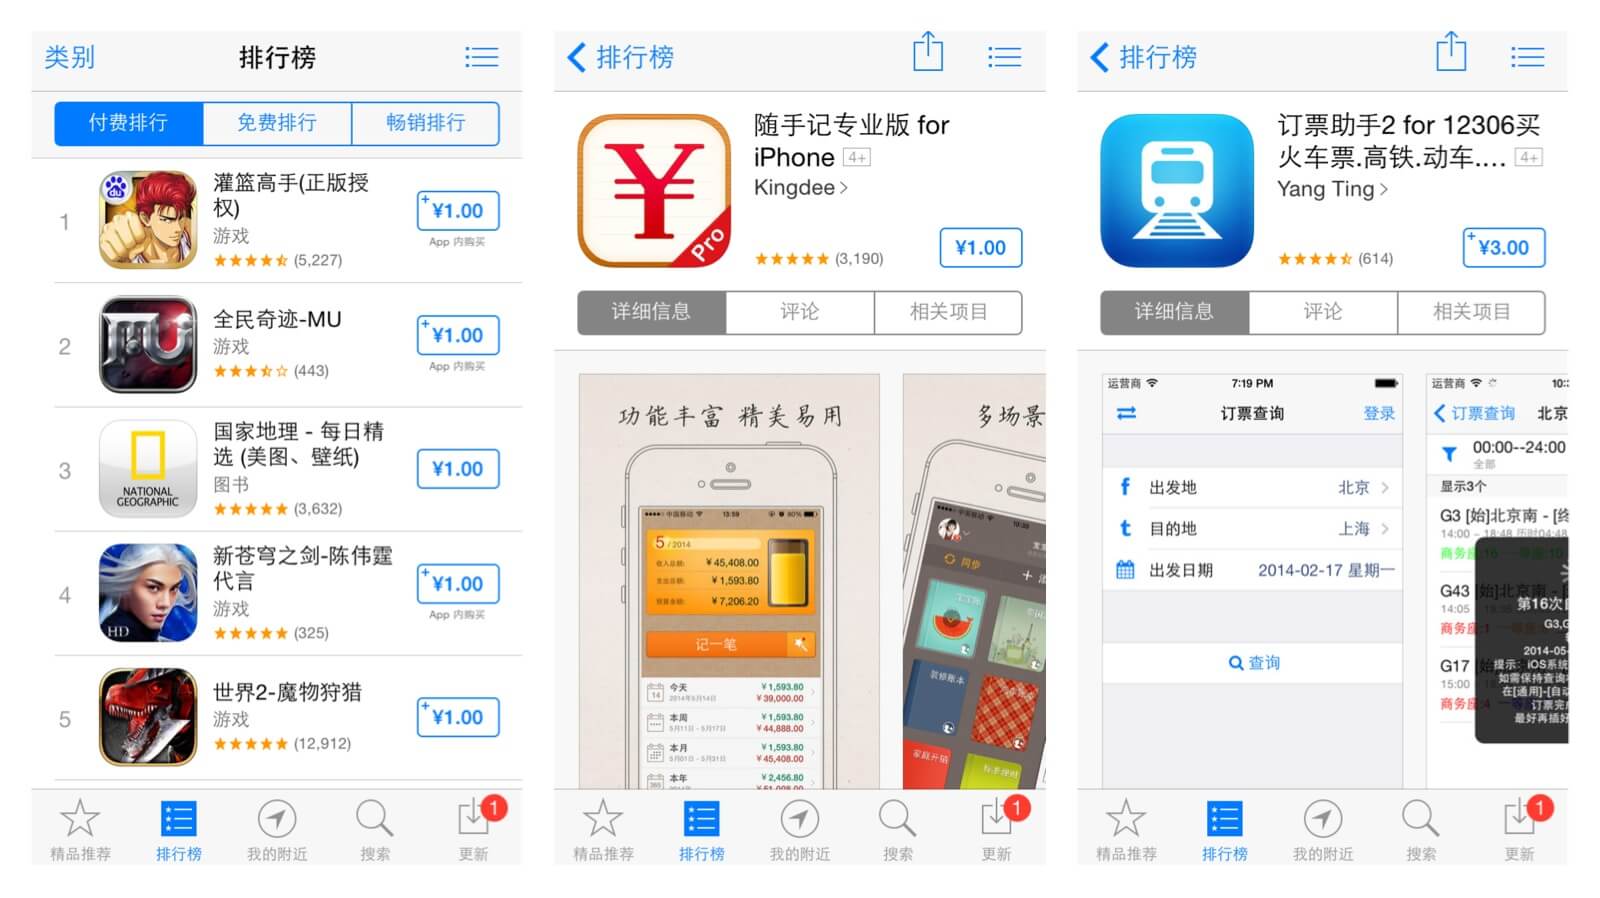 60 VPN Apps Removed from China's App Store - Best 10 VPN Reviews